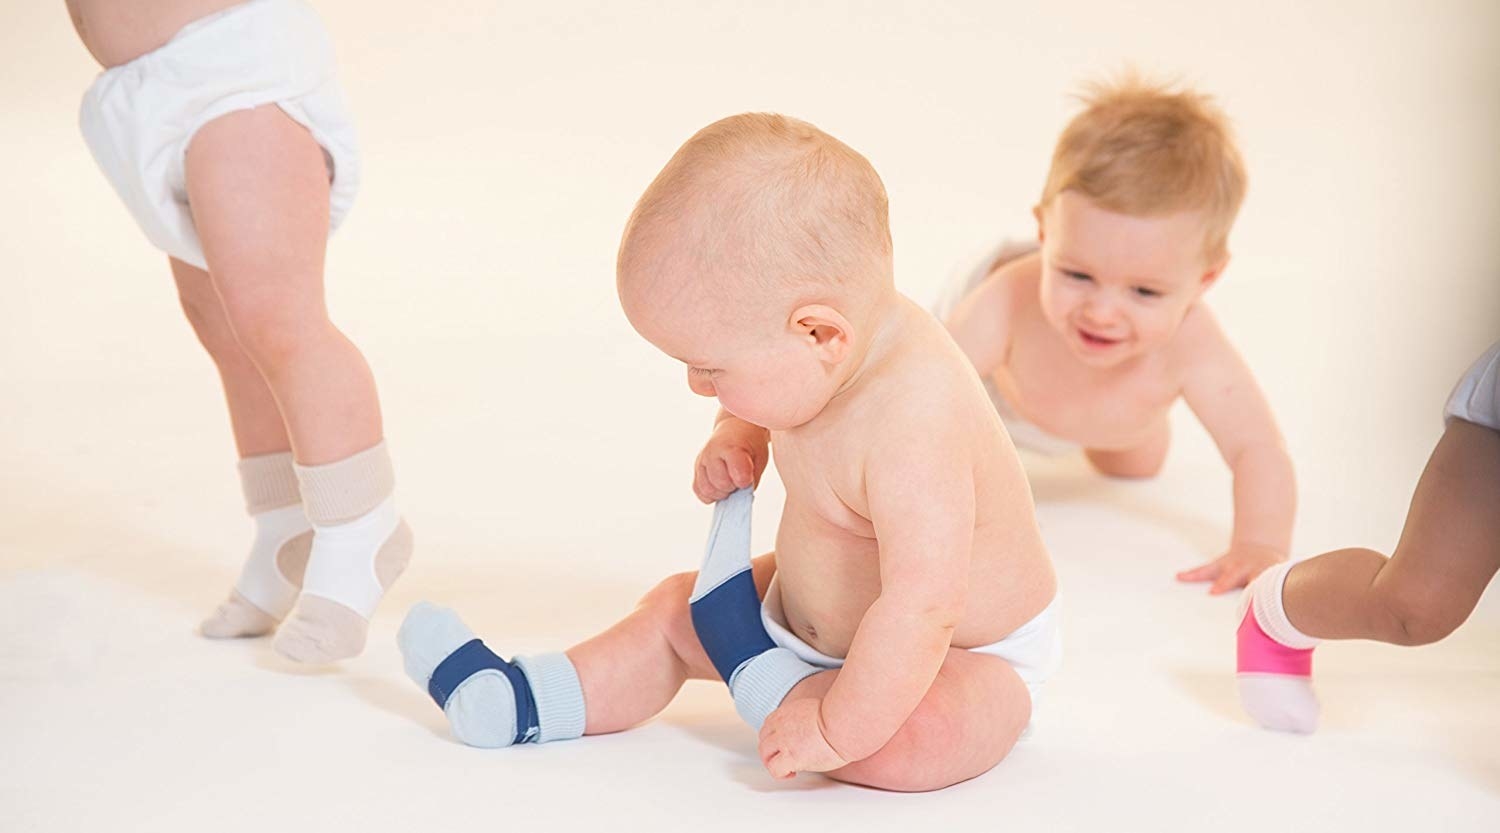 several babies wearing socks and diapers. one is unsuccessfully trying to remove a sock that has the product covering it.